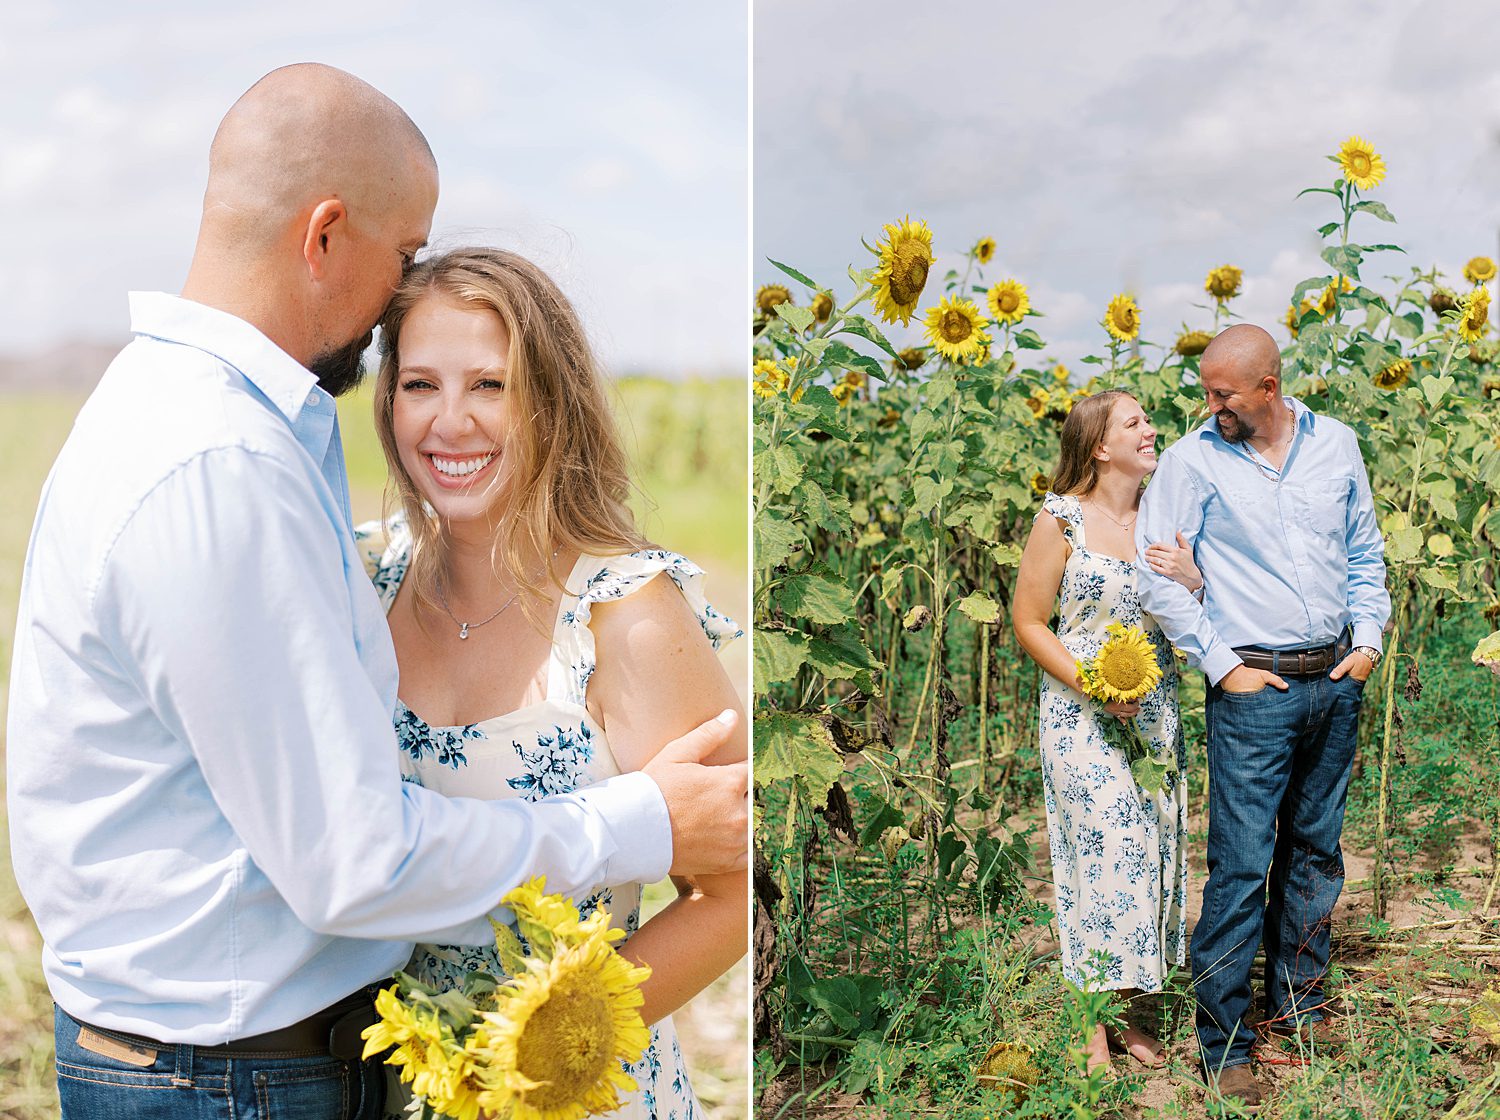 man leans to kiss woman's forehead during FL engagement photos in sunflower field